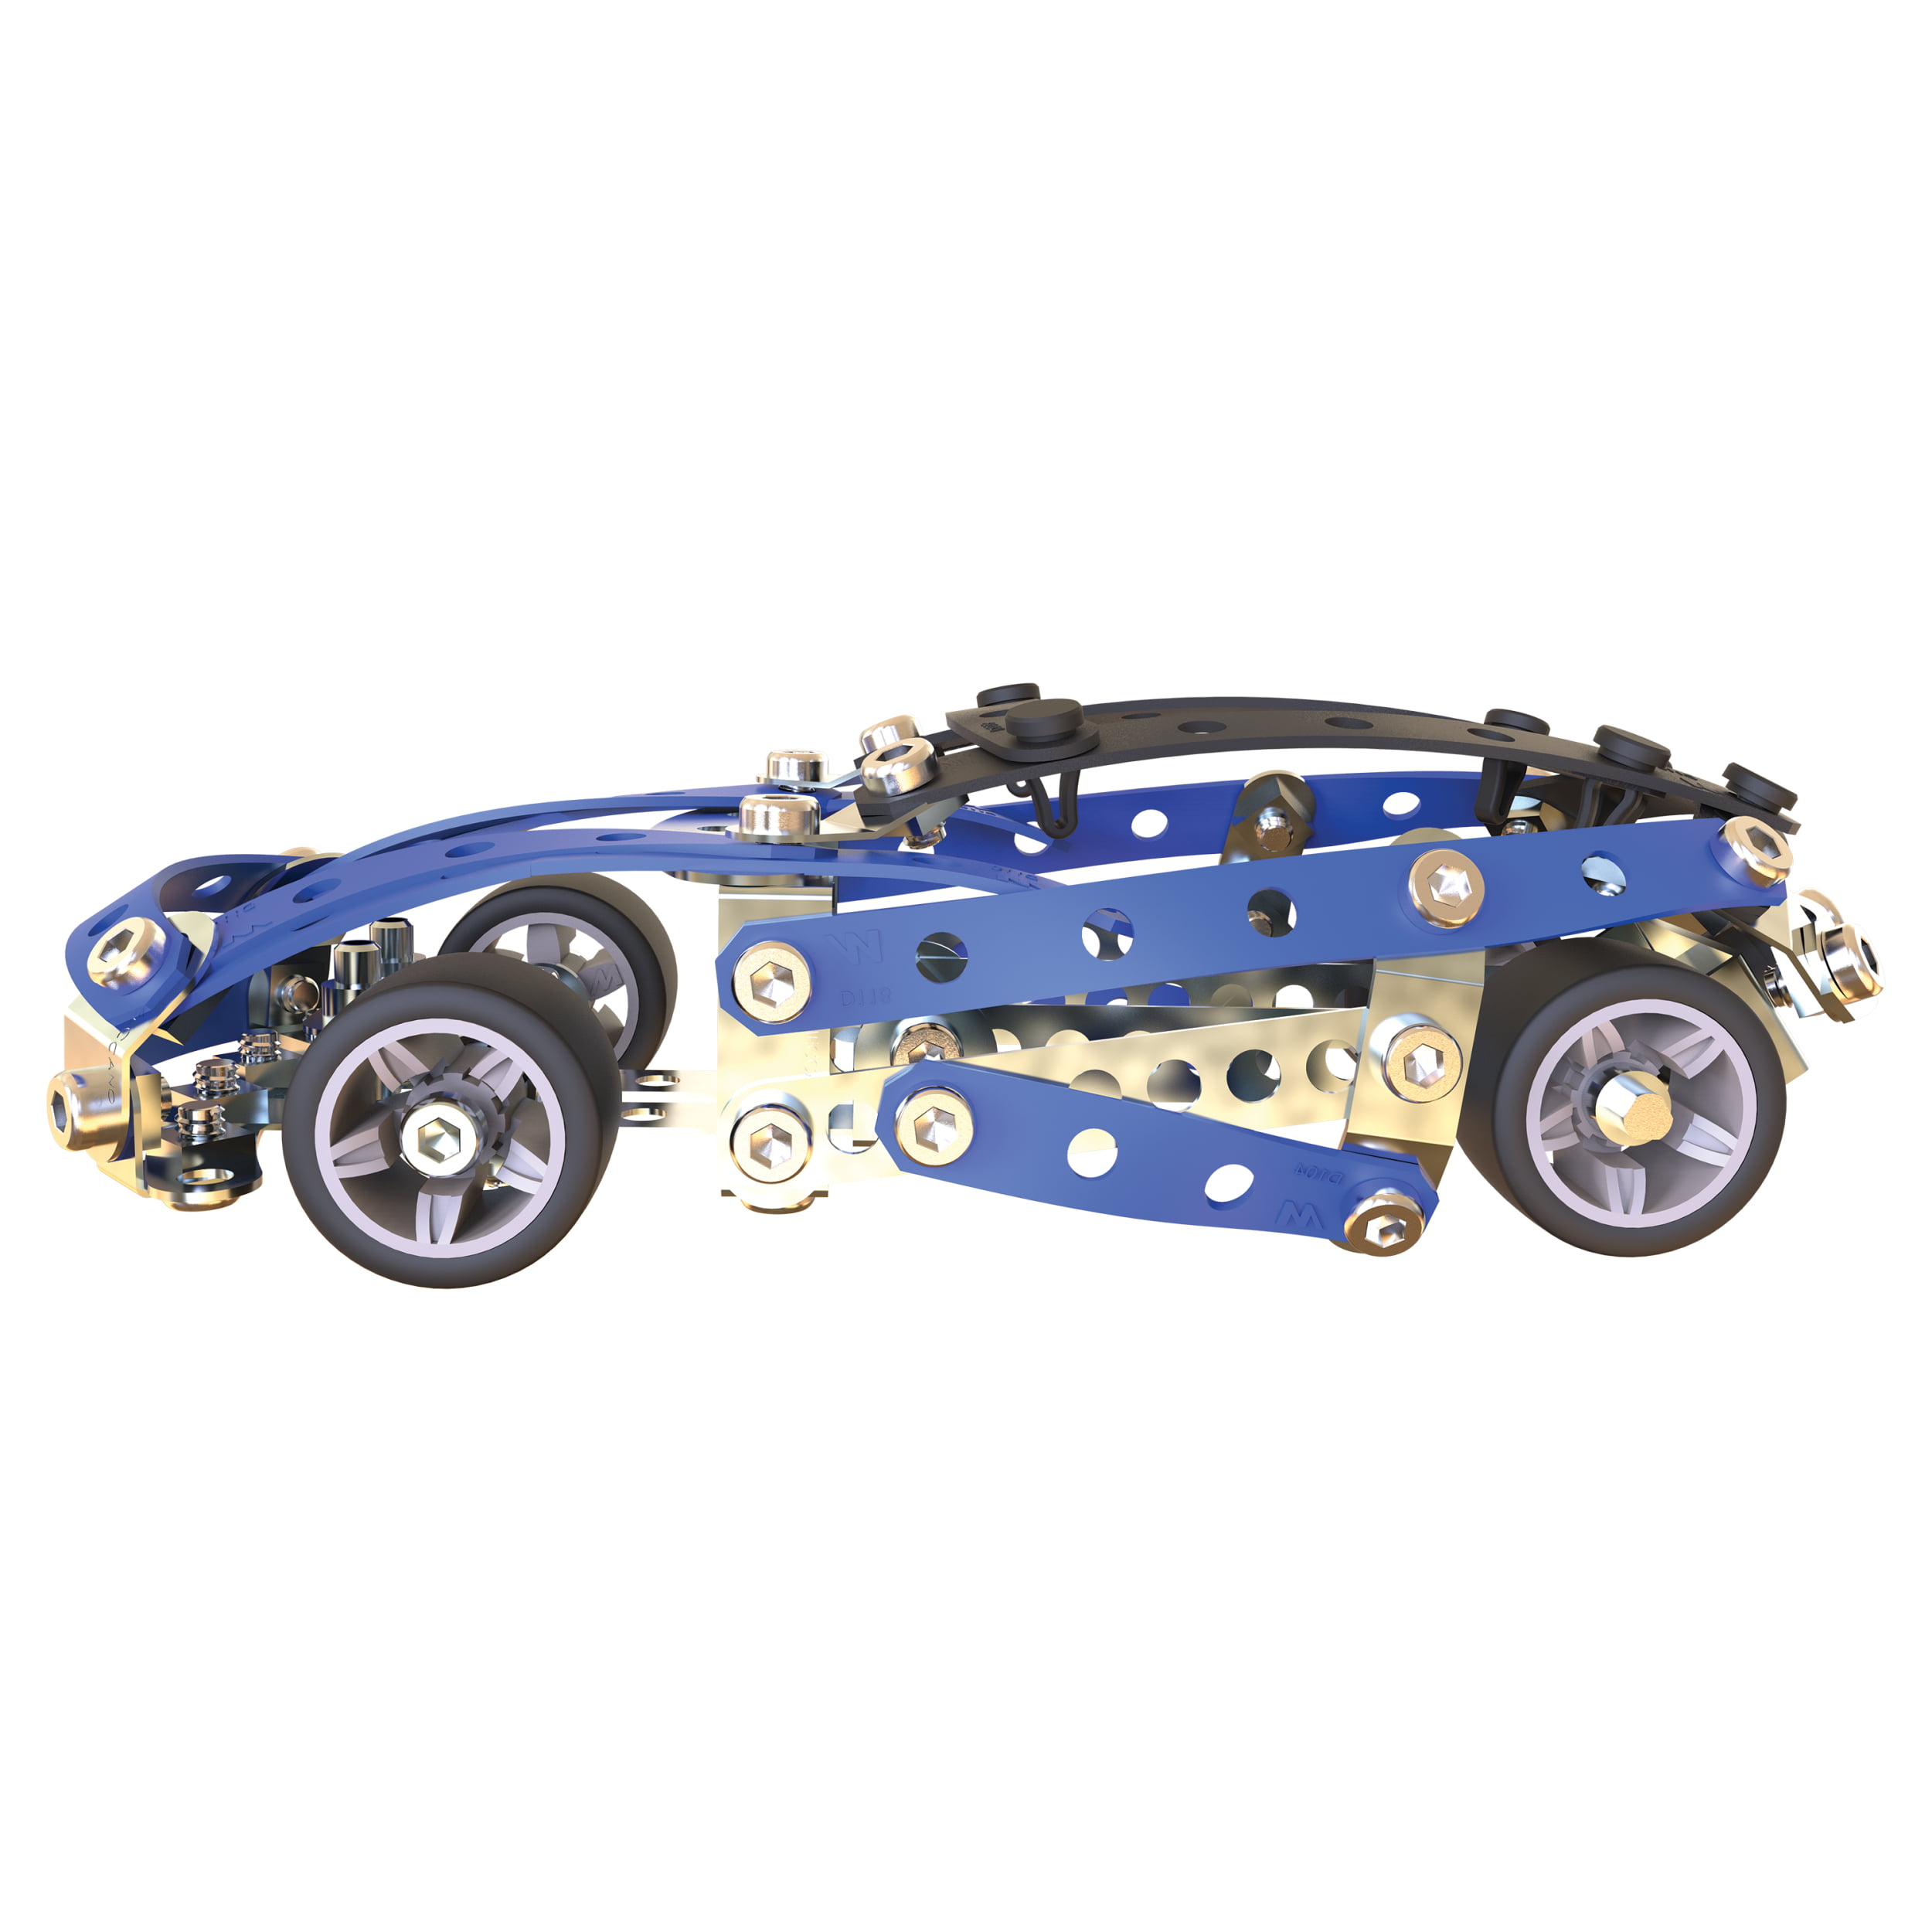 Car and Motorcycle Meccano 6053371 to be built